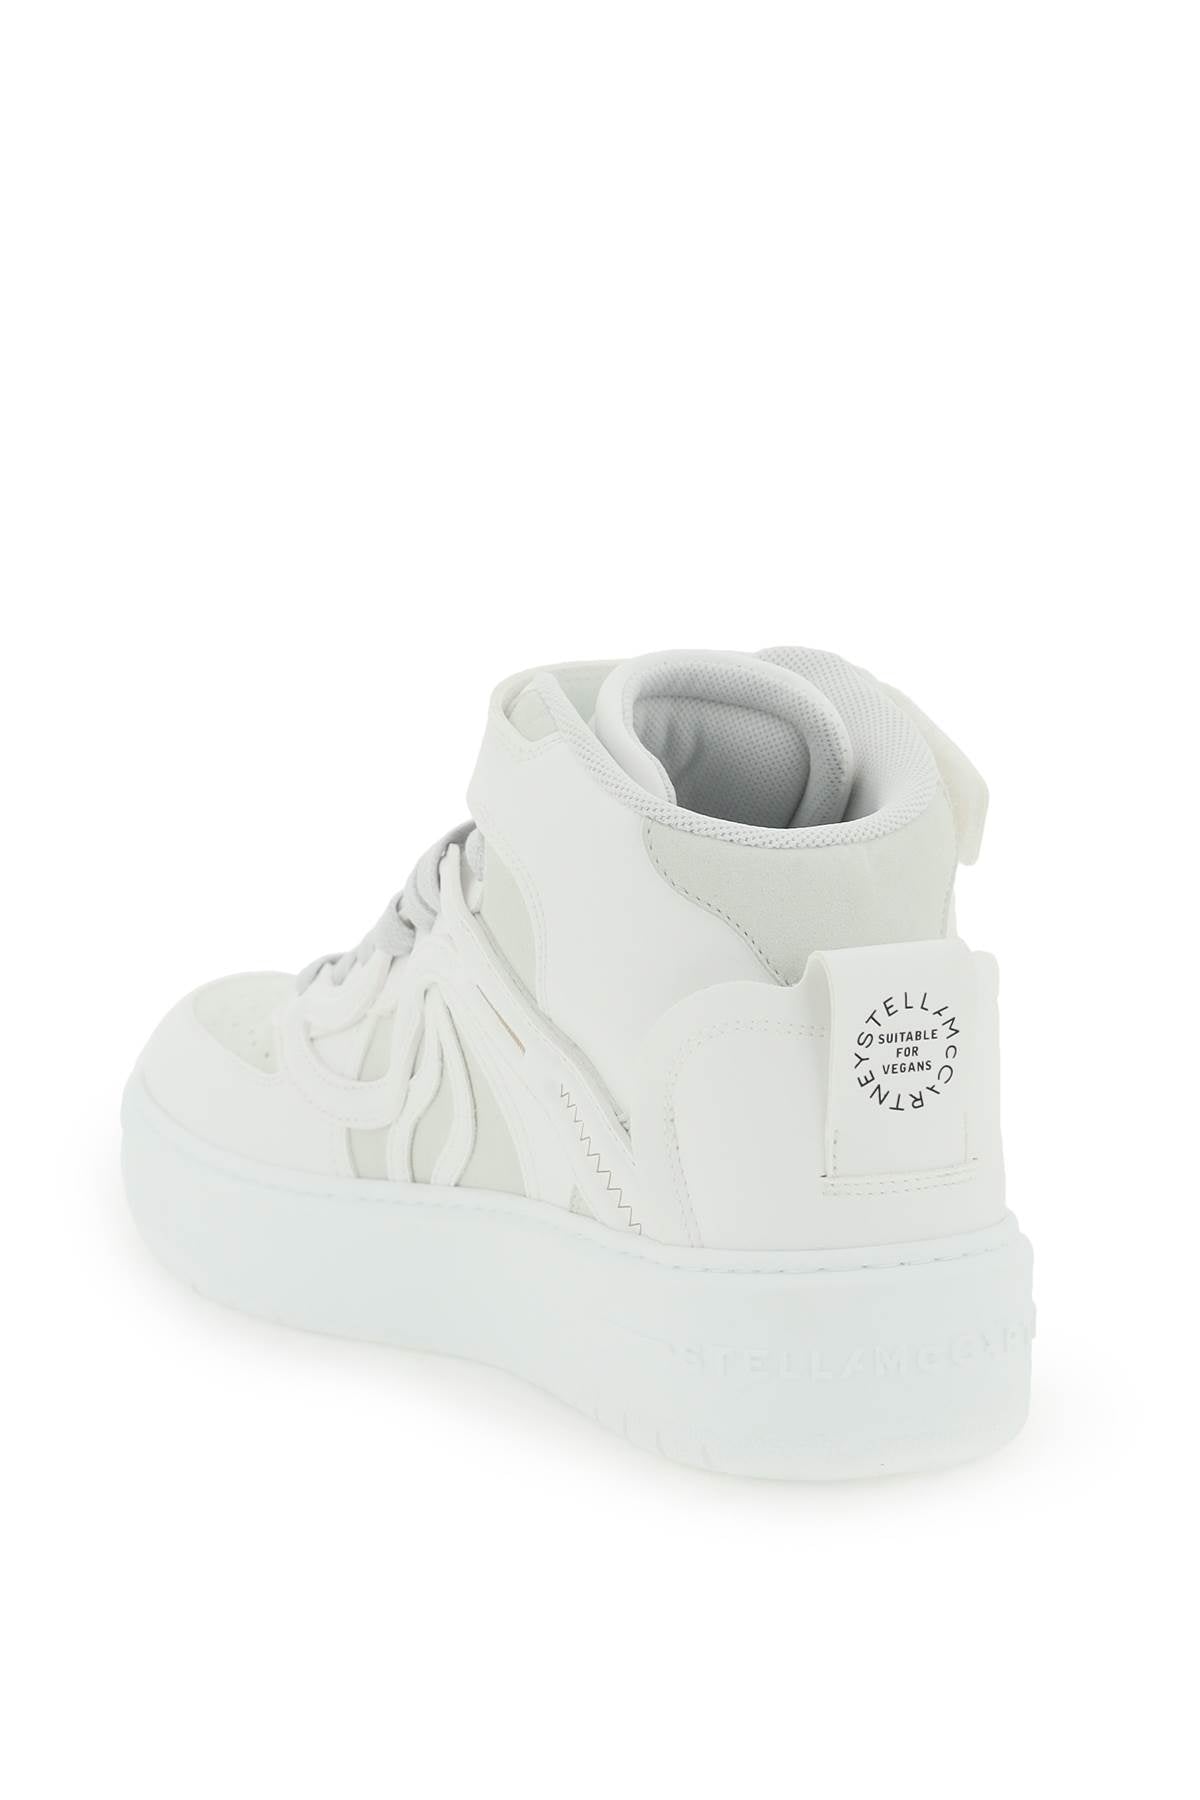 STELLA MCCARTNEY S-Wave High Top Sneakers - White